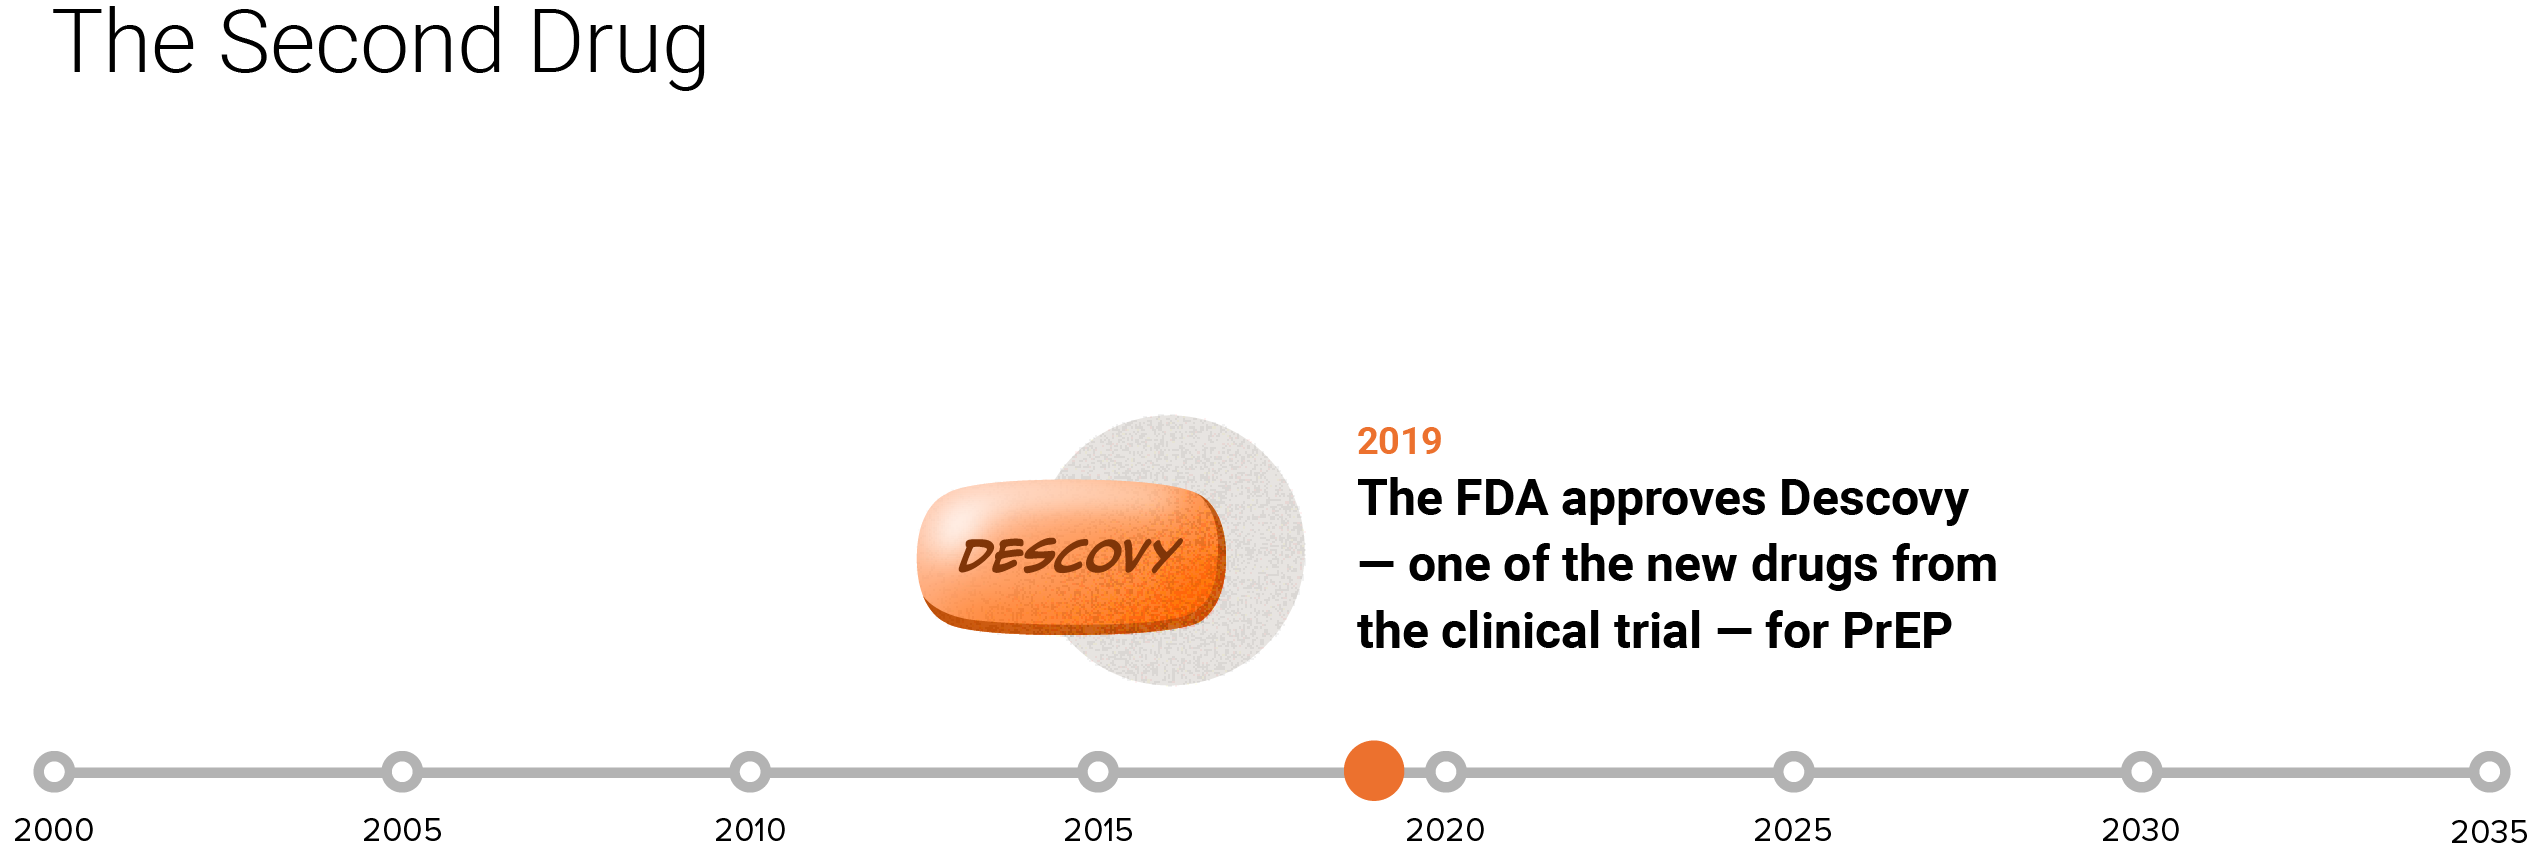 This step of the timeline has the headline: The Second Drug. The timeline has the following items plotted with blue dots between 2000 and 2035. 2019, The FDA approves Descovy - one of the new drugs from the clinical trial - for PrEP. There is an illustration of an orange Descovy pill.